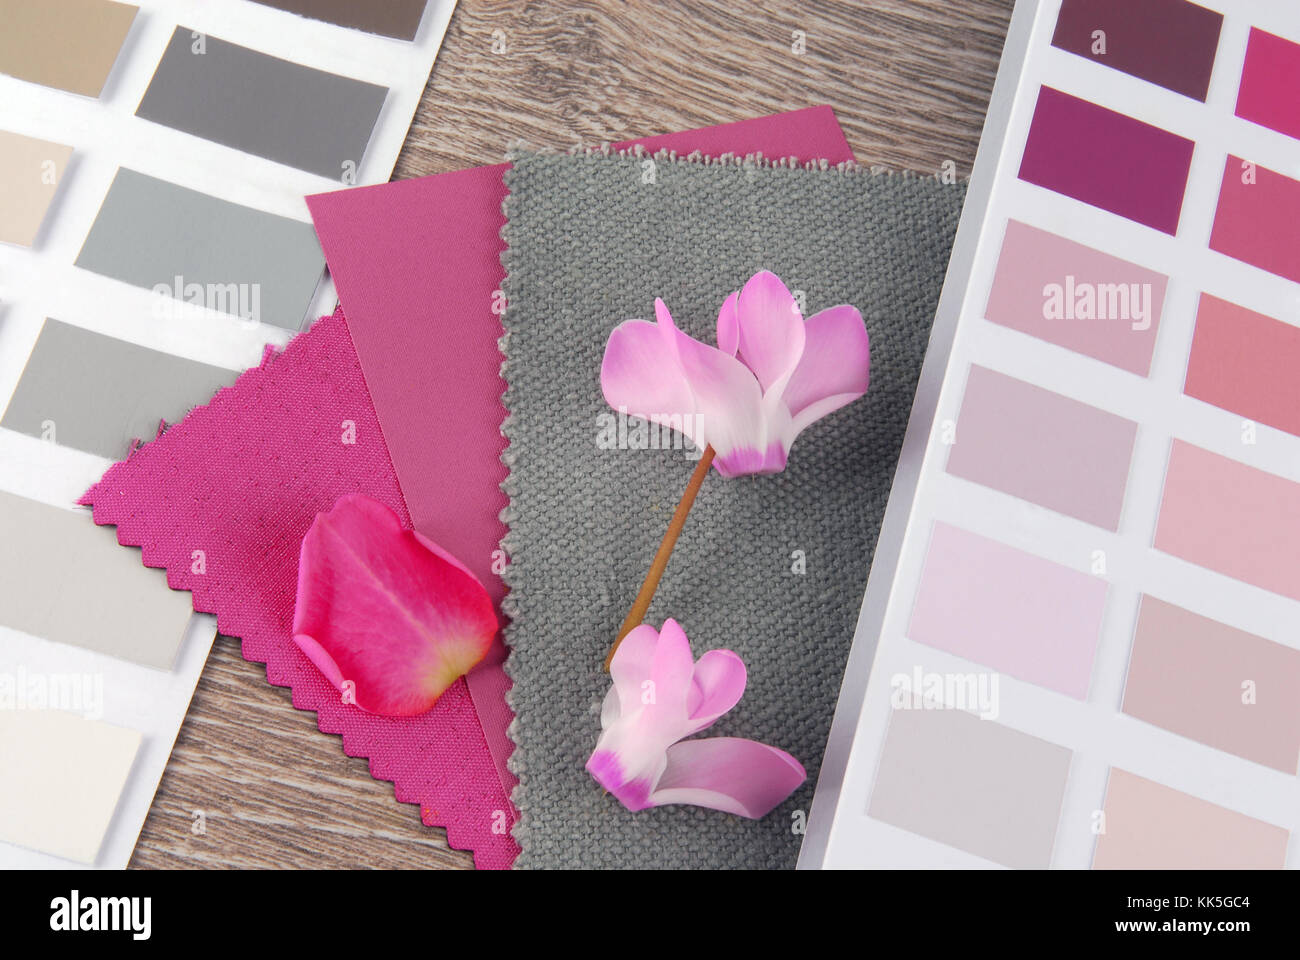 fabric swatches designing combine with colors Stock Photo